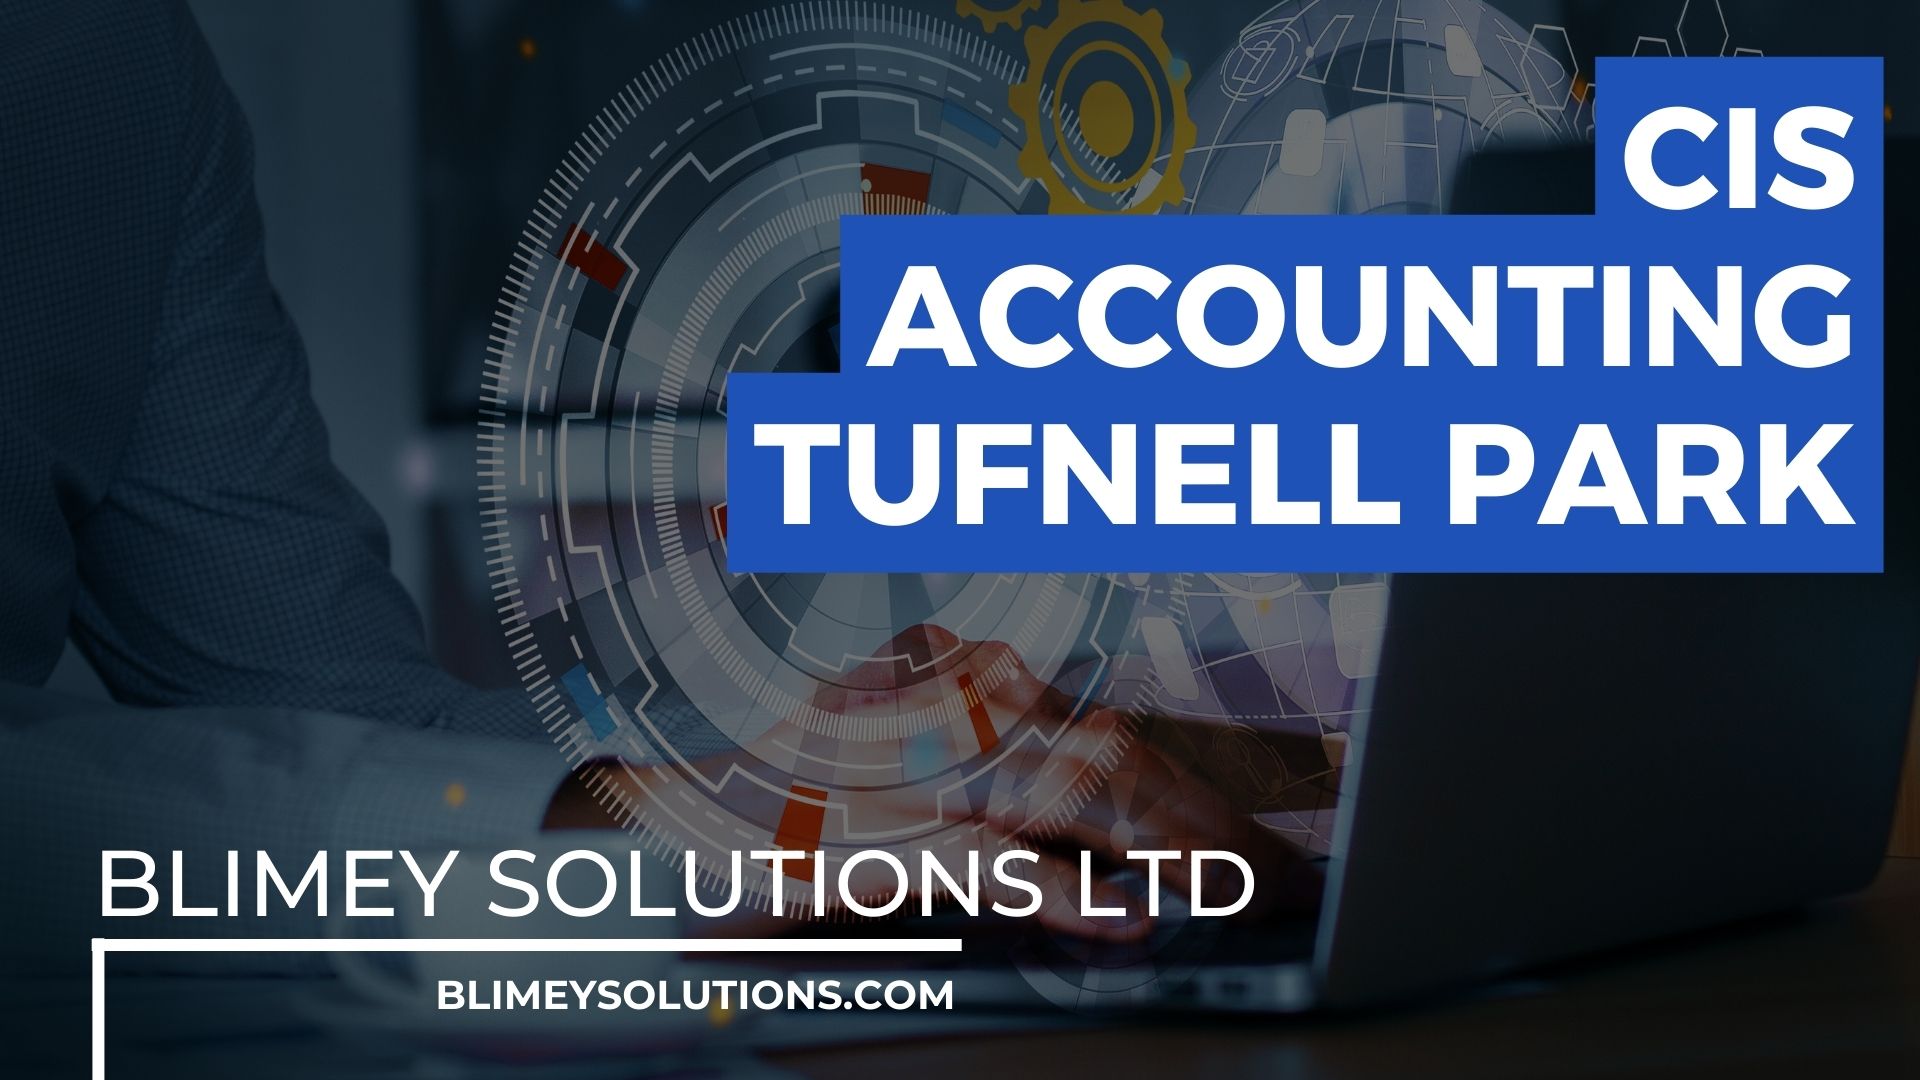 CIS Accounting in Tufnell Park N19 London